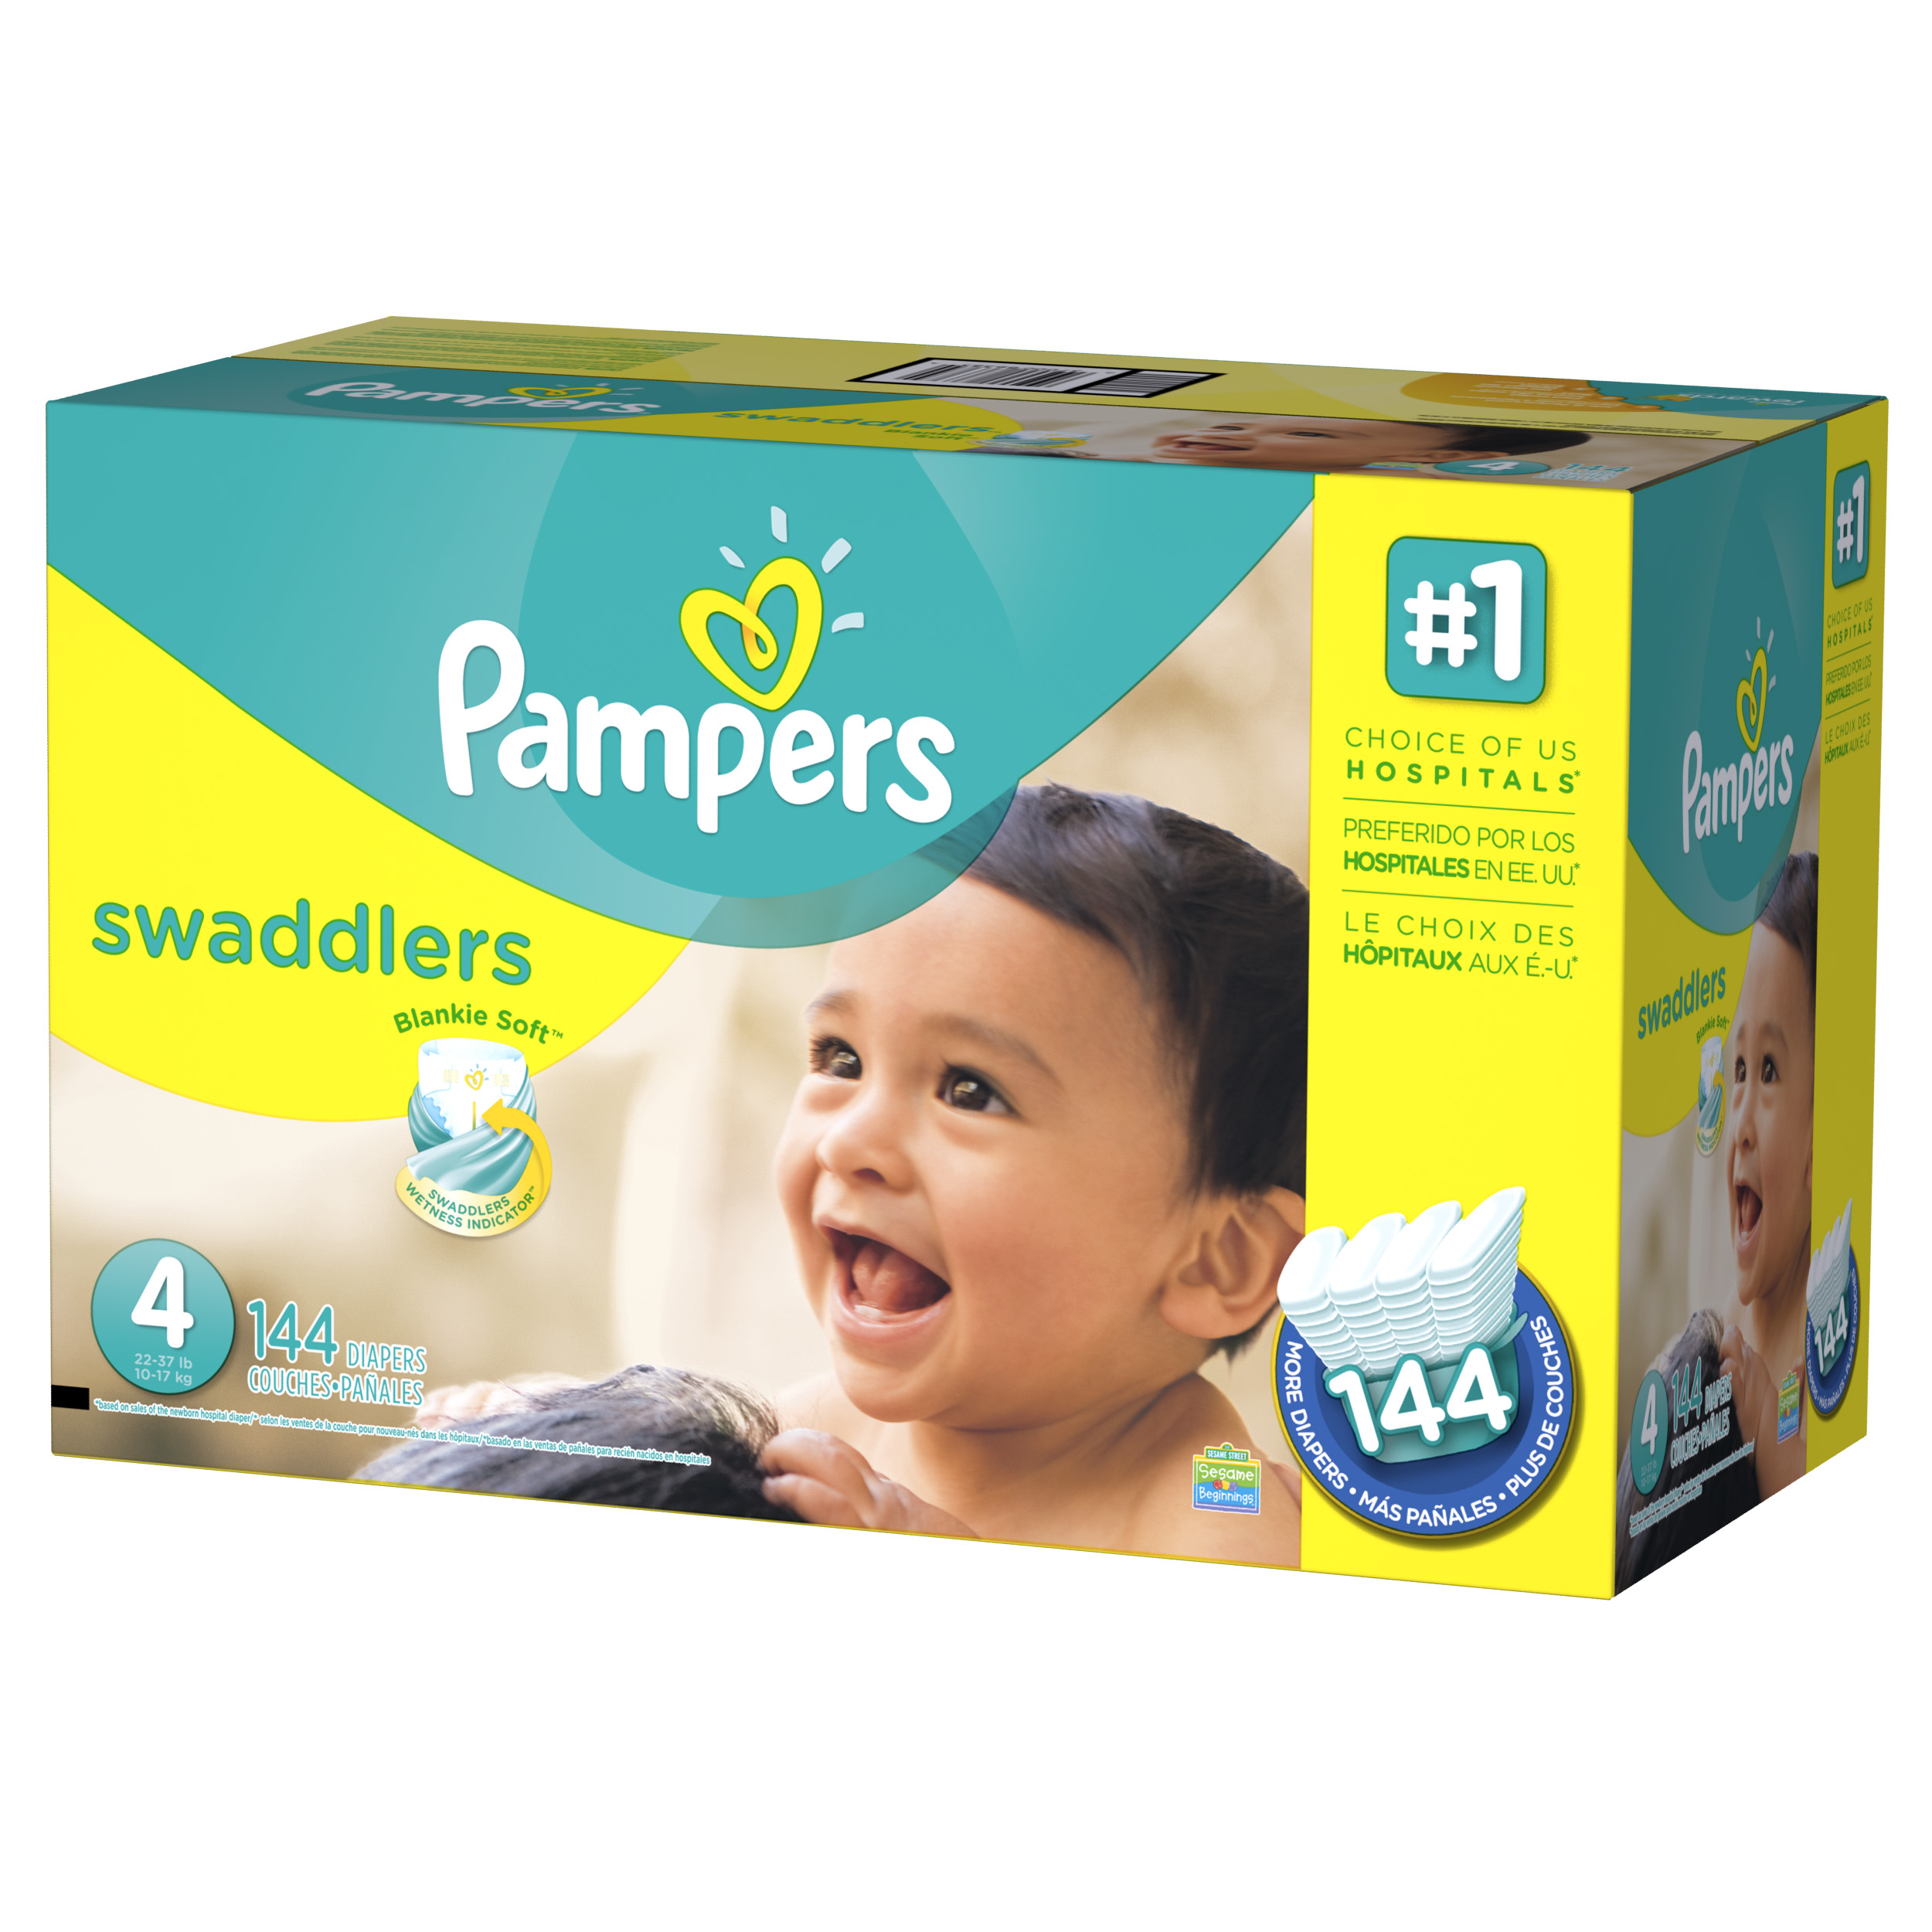 Pampers Swaddlers Diapers Size 4 144 count - image 1 of 10